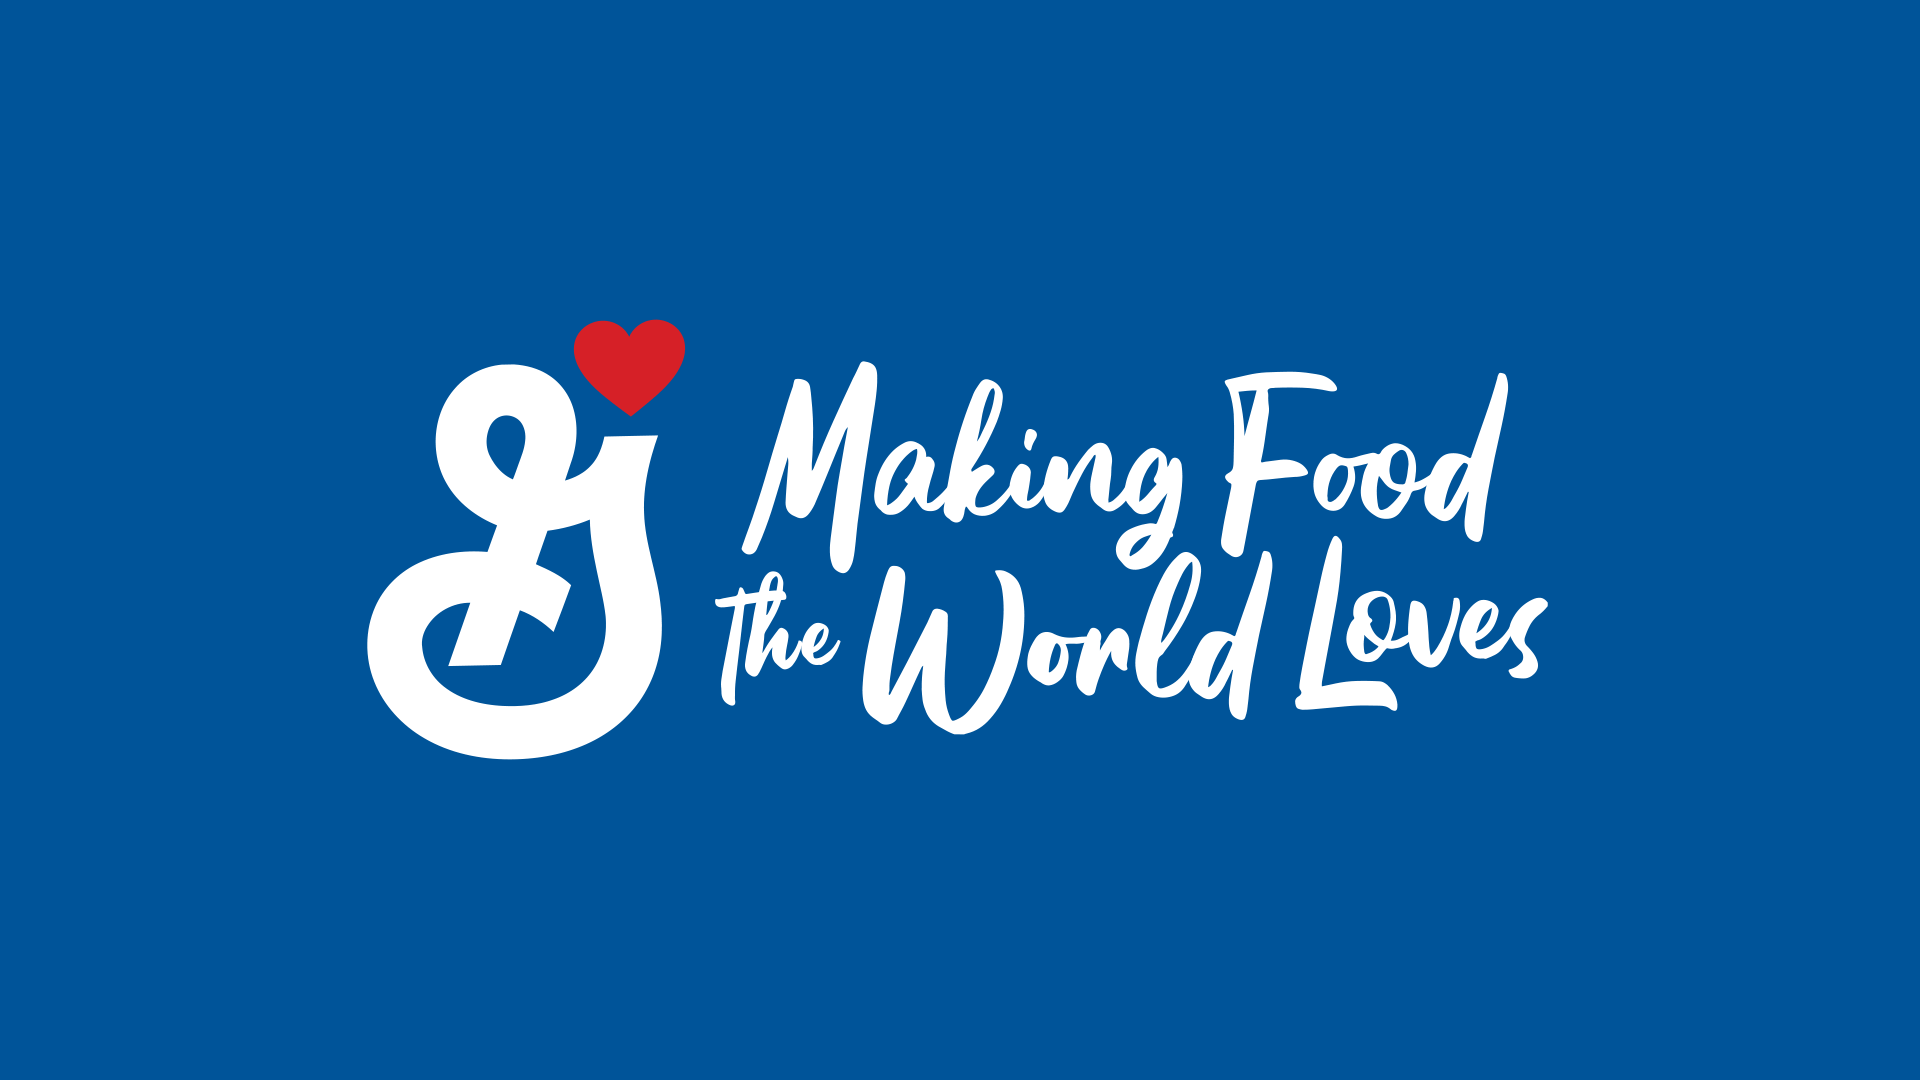 General Mills logo with the slogan Making Food The World Loves